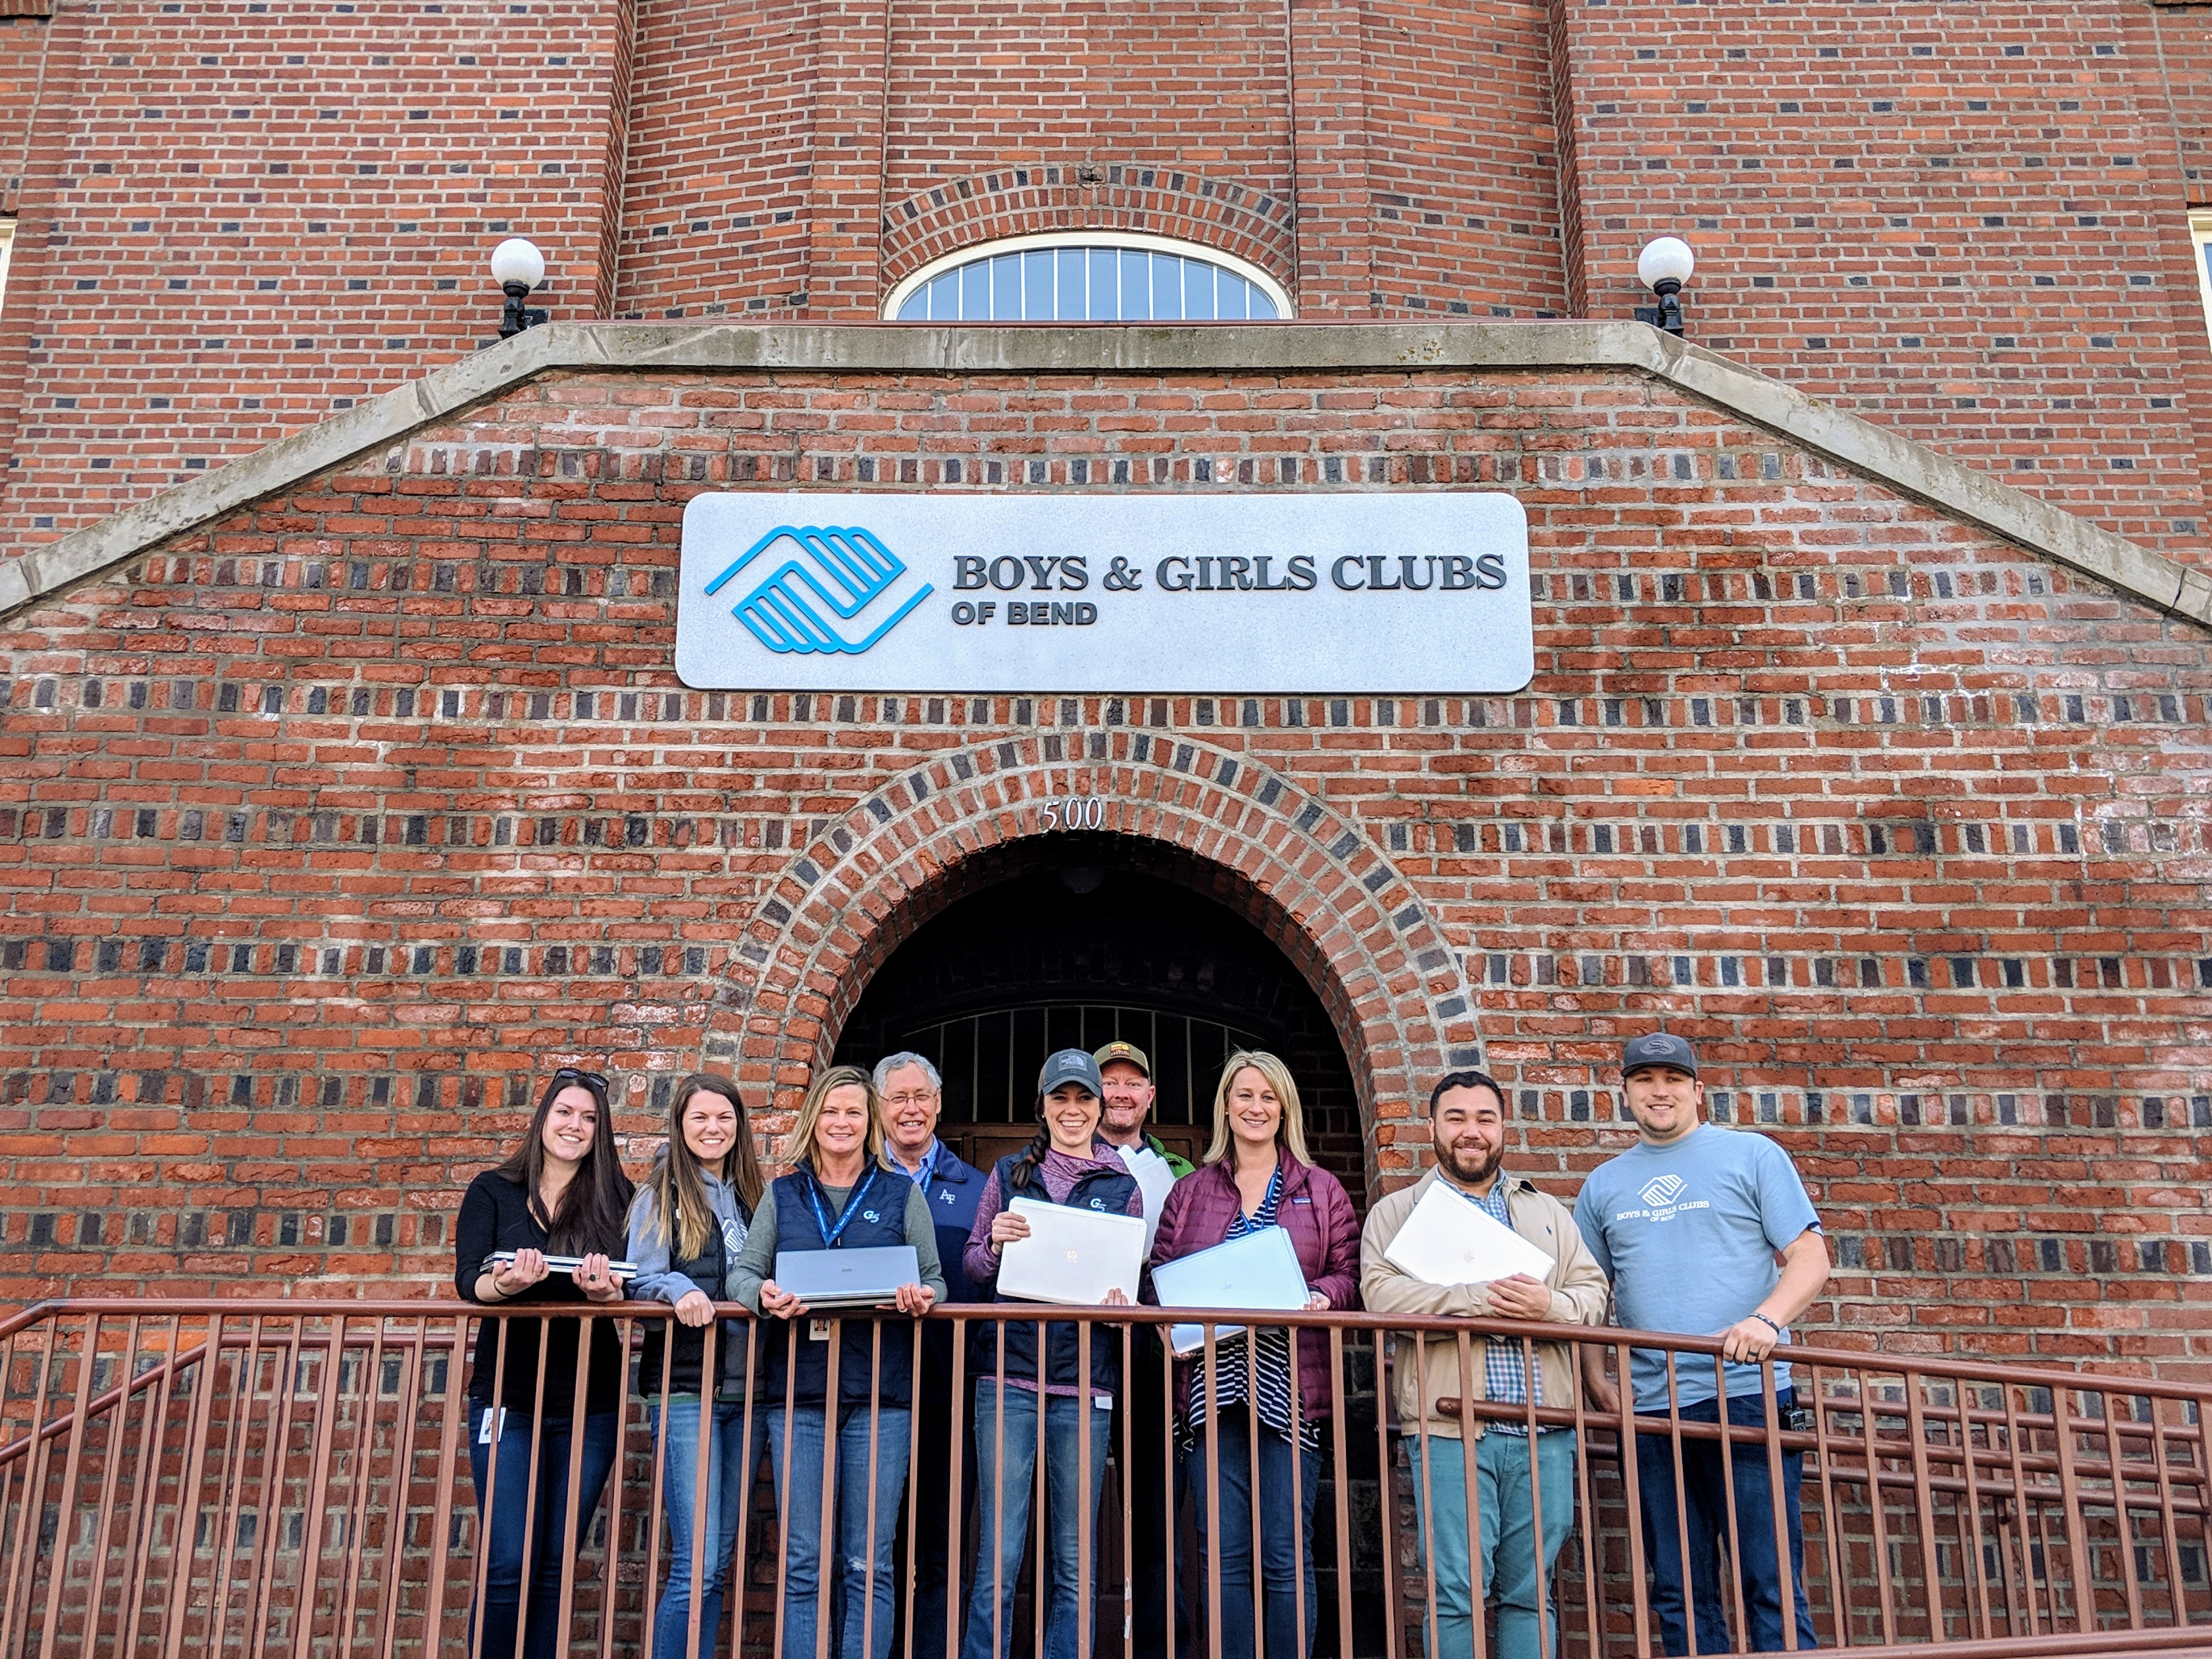 G5 donates computers to Boys & Girls Club of Bend